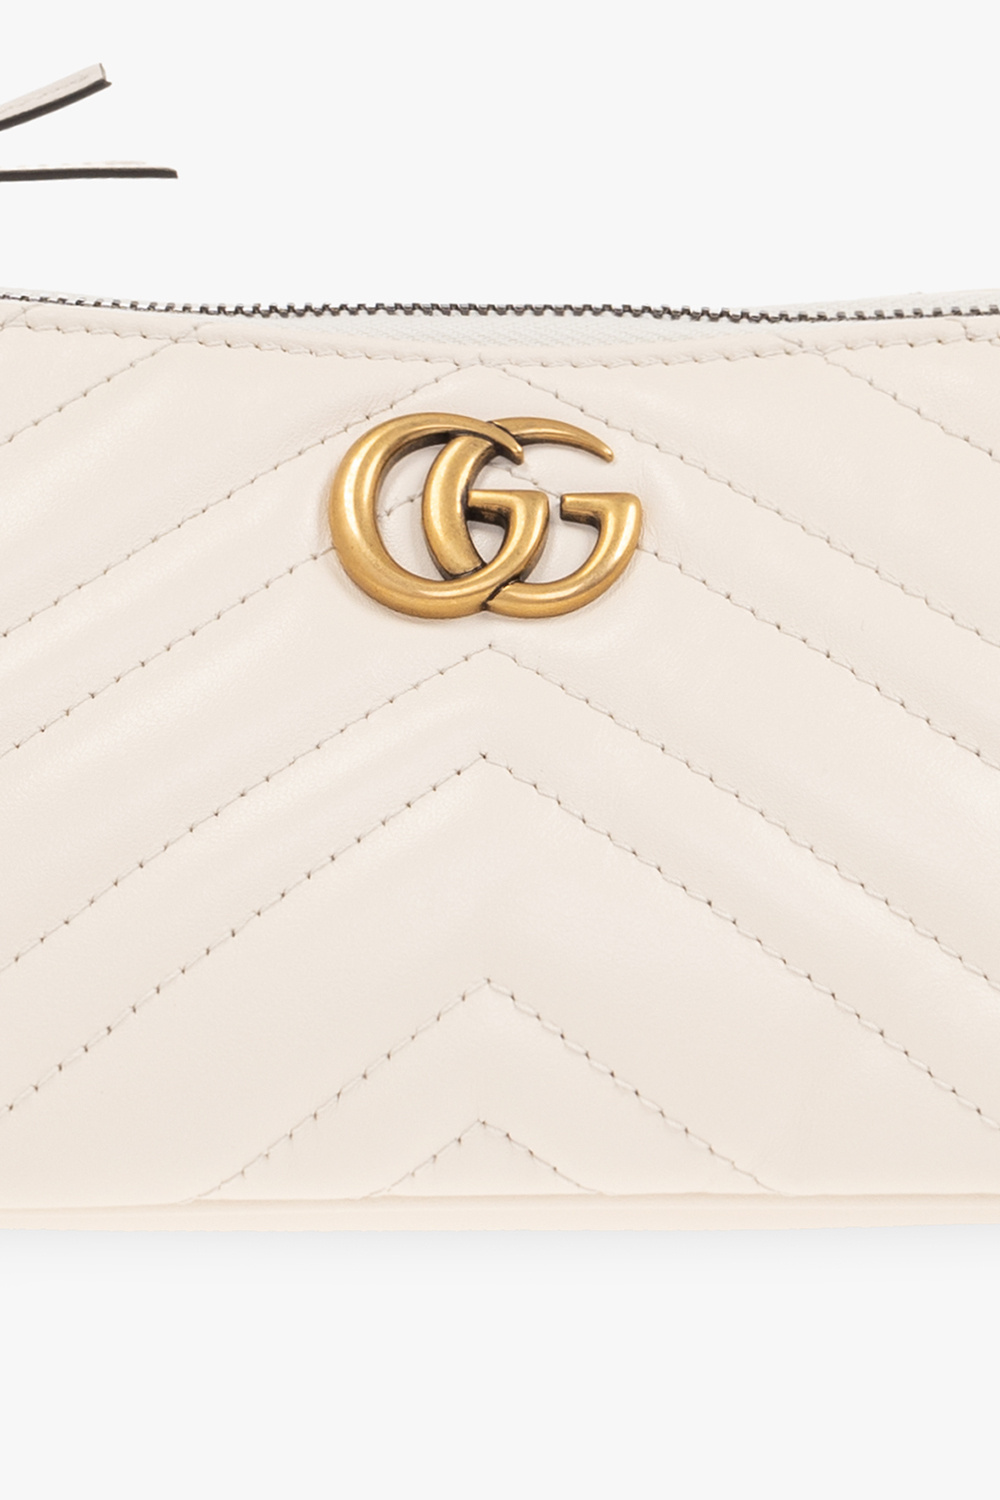 Gucci ‘GG Marmont 2.0’ quilted shoulder bag